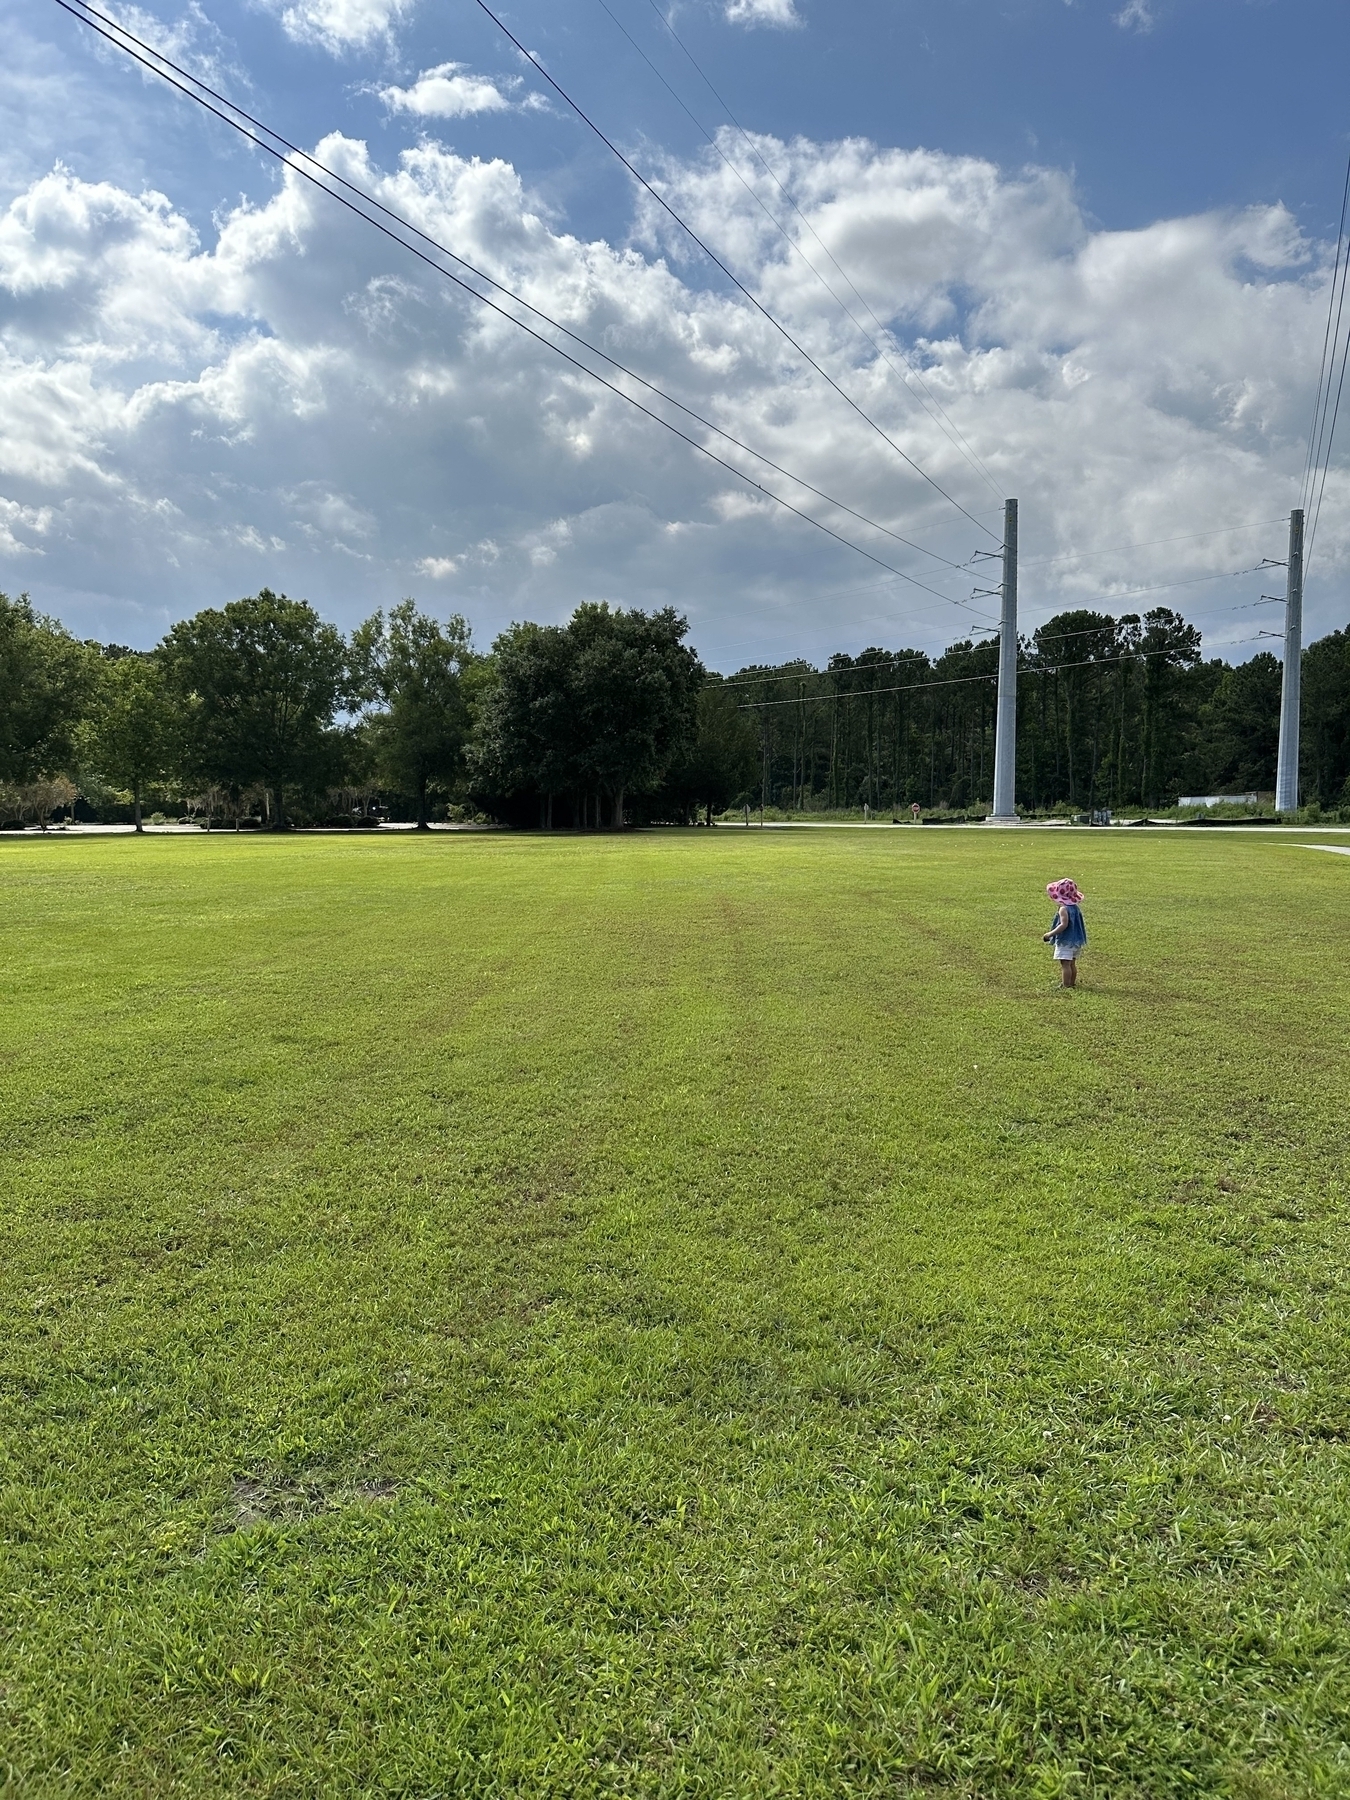 My daughter in the middle of a field in a county park. 